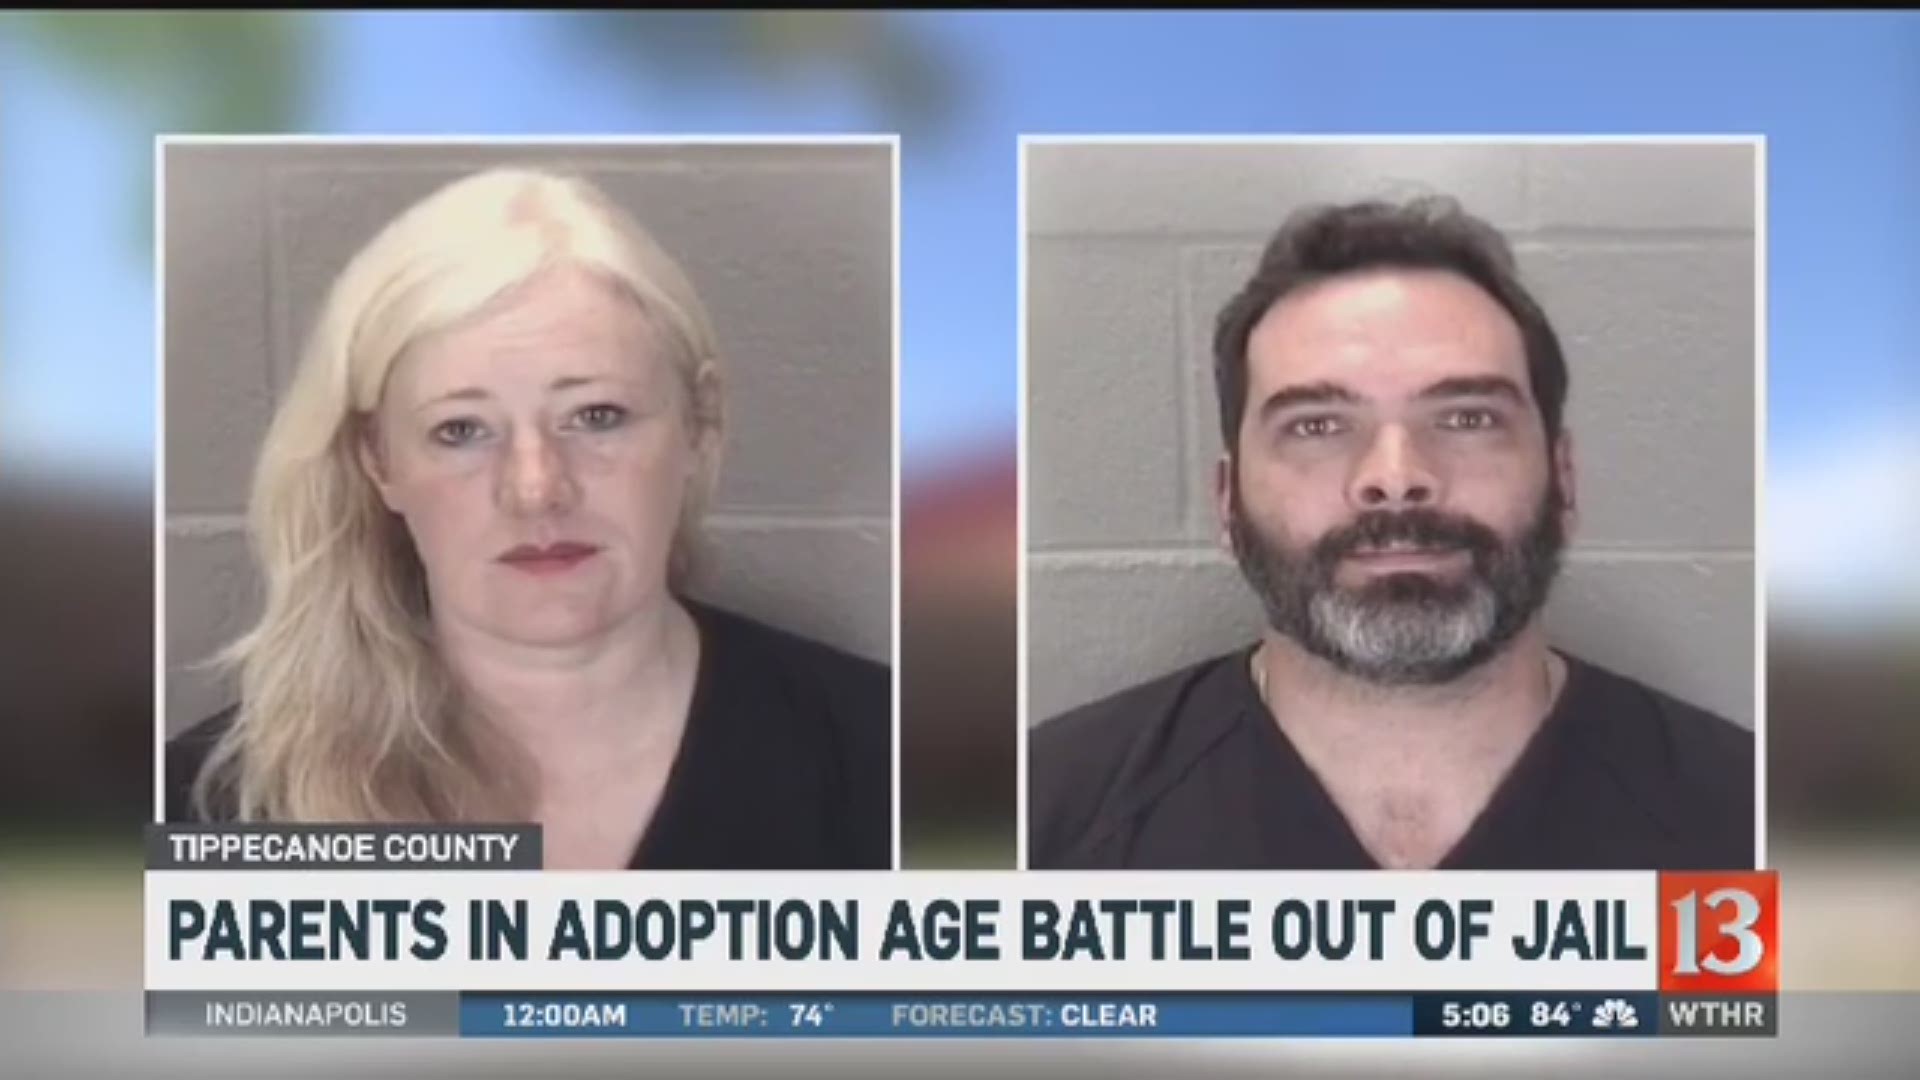 An Indiana couple says they were the victims of an adoption scam, claiming the 8-year-old they adopted was actually 22-years-old. (WTHR)